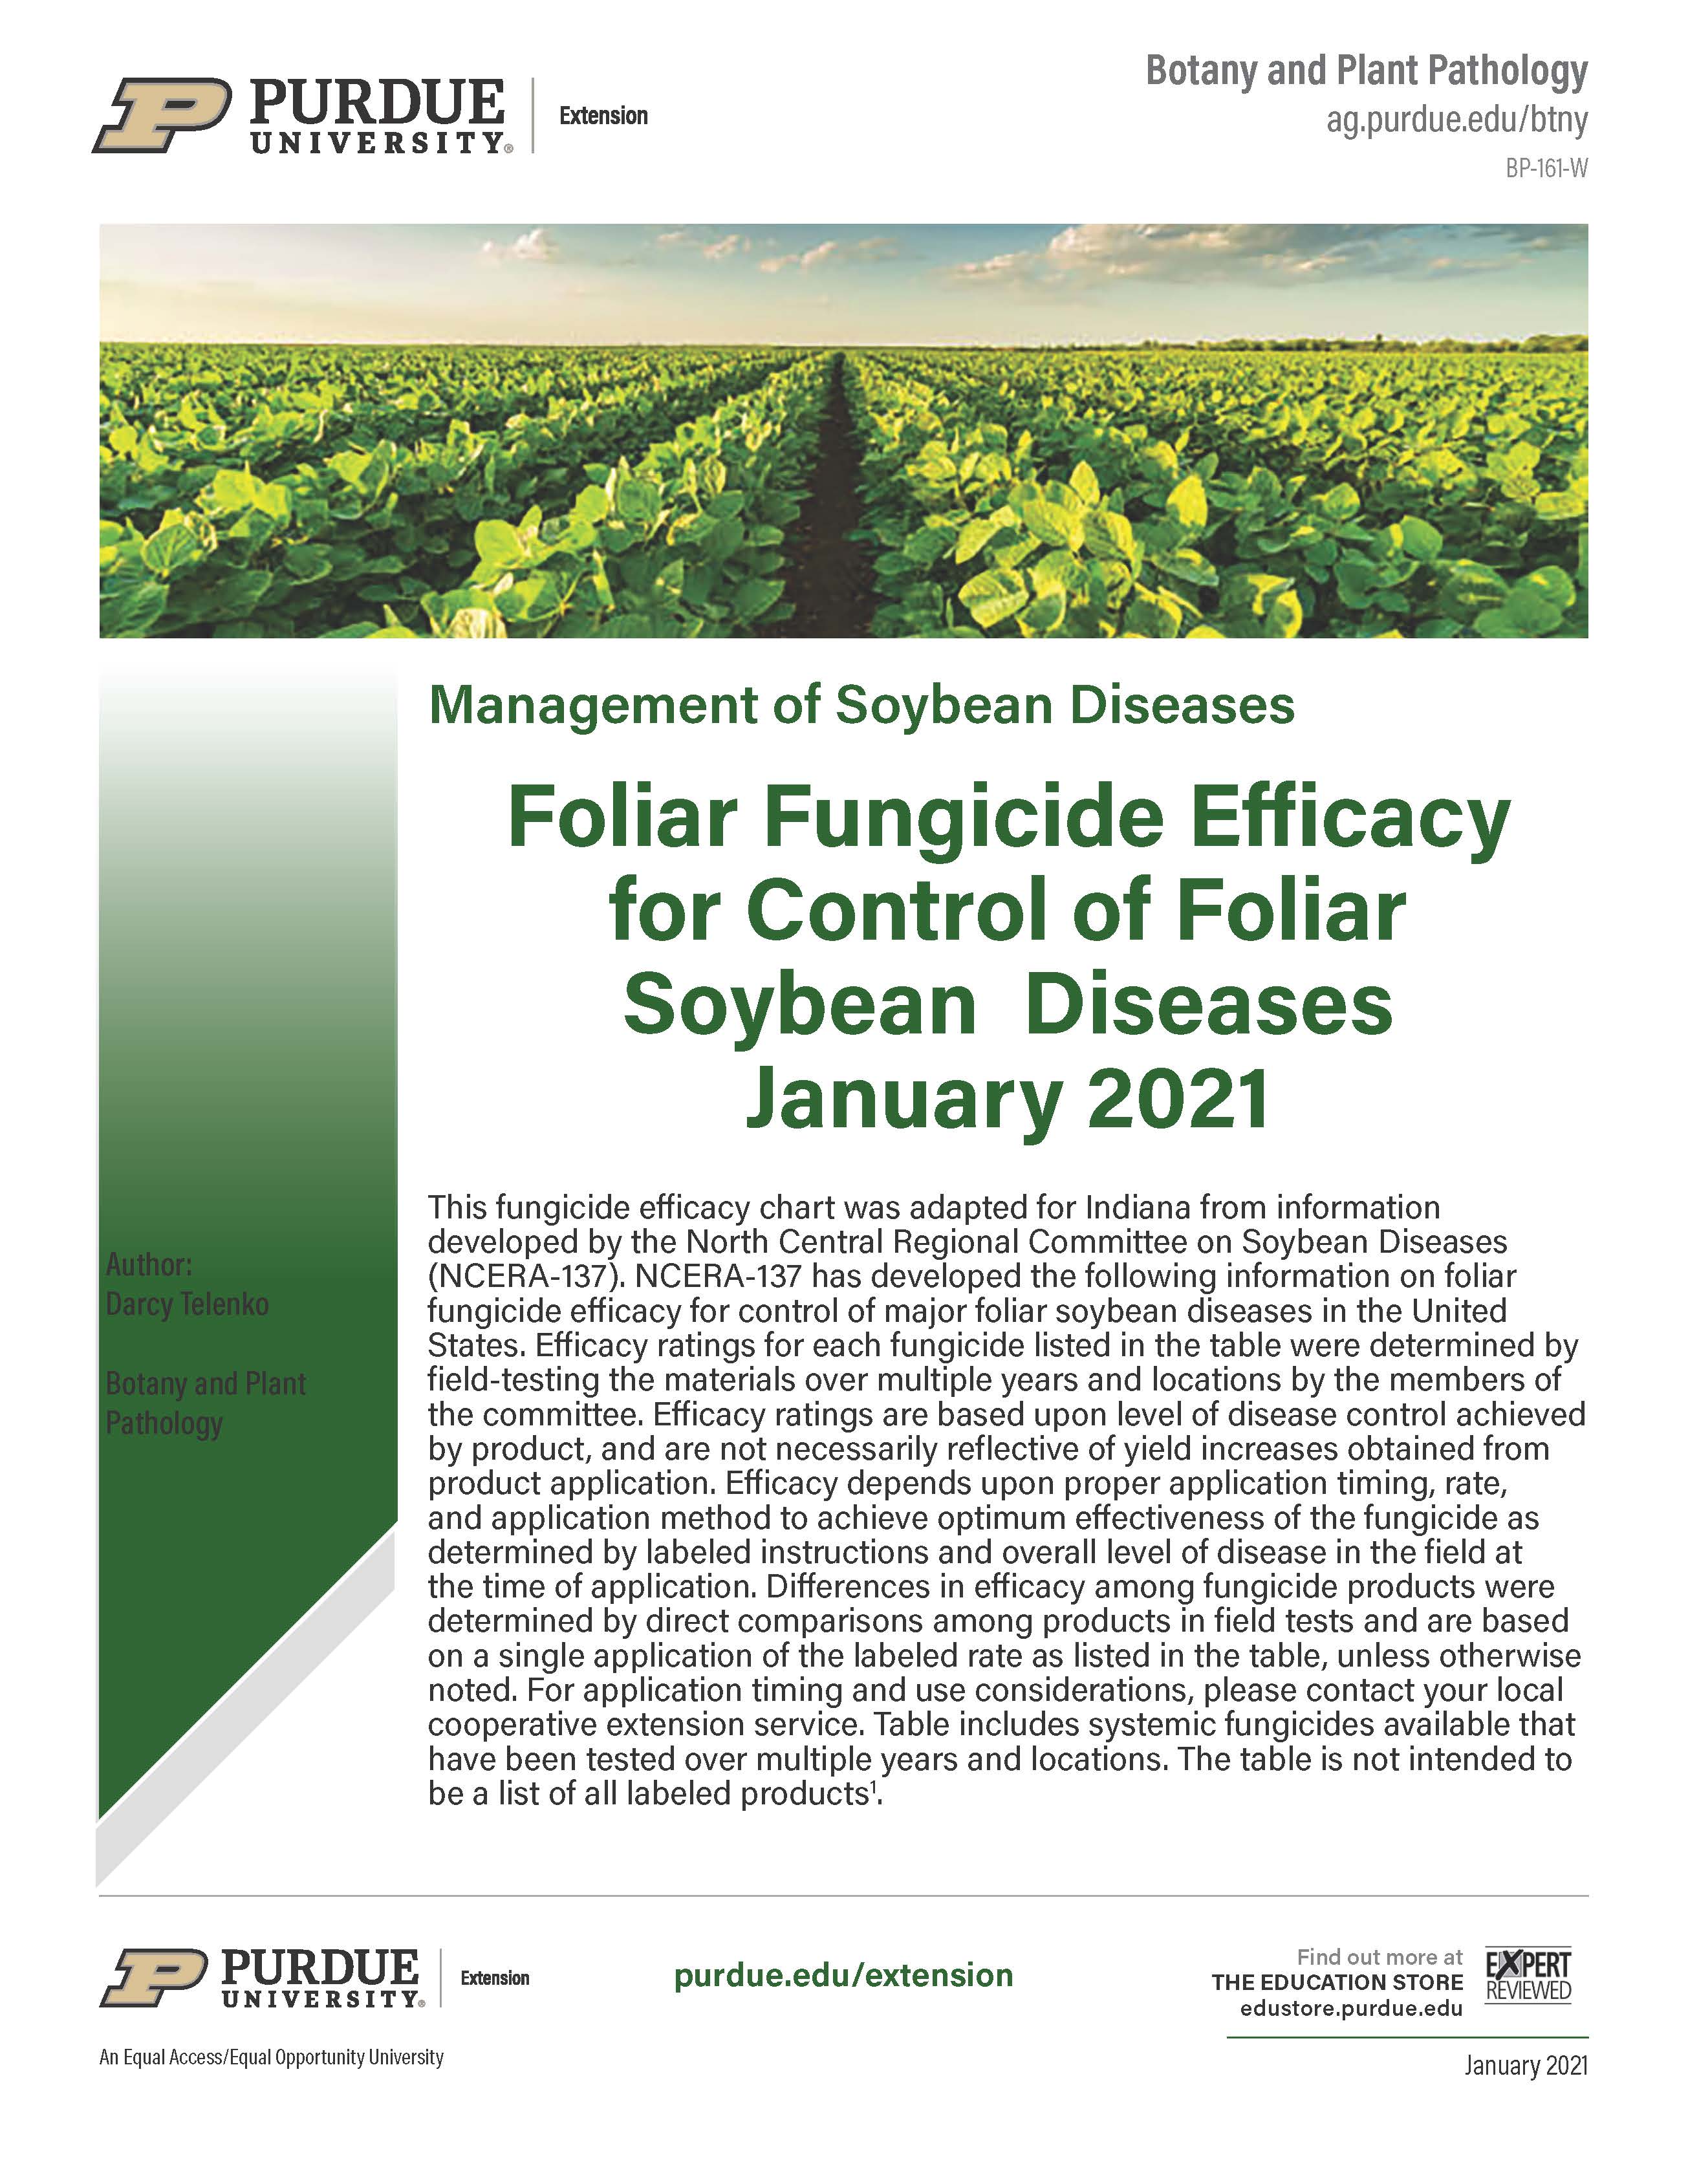 Soybean Disease Management: Fungicide Efficacy for Control of Soybean Foliar Diseases